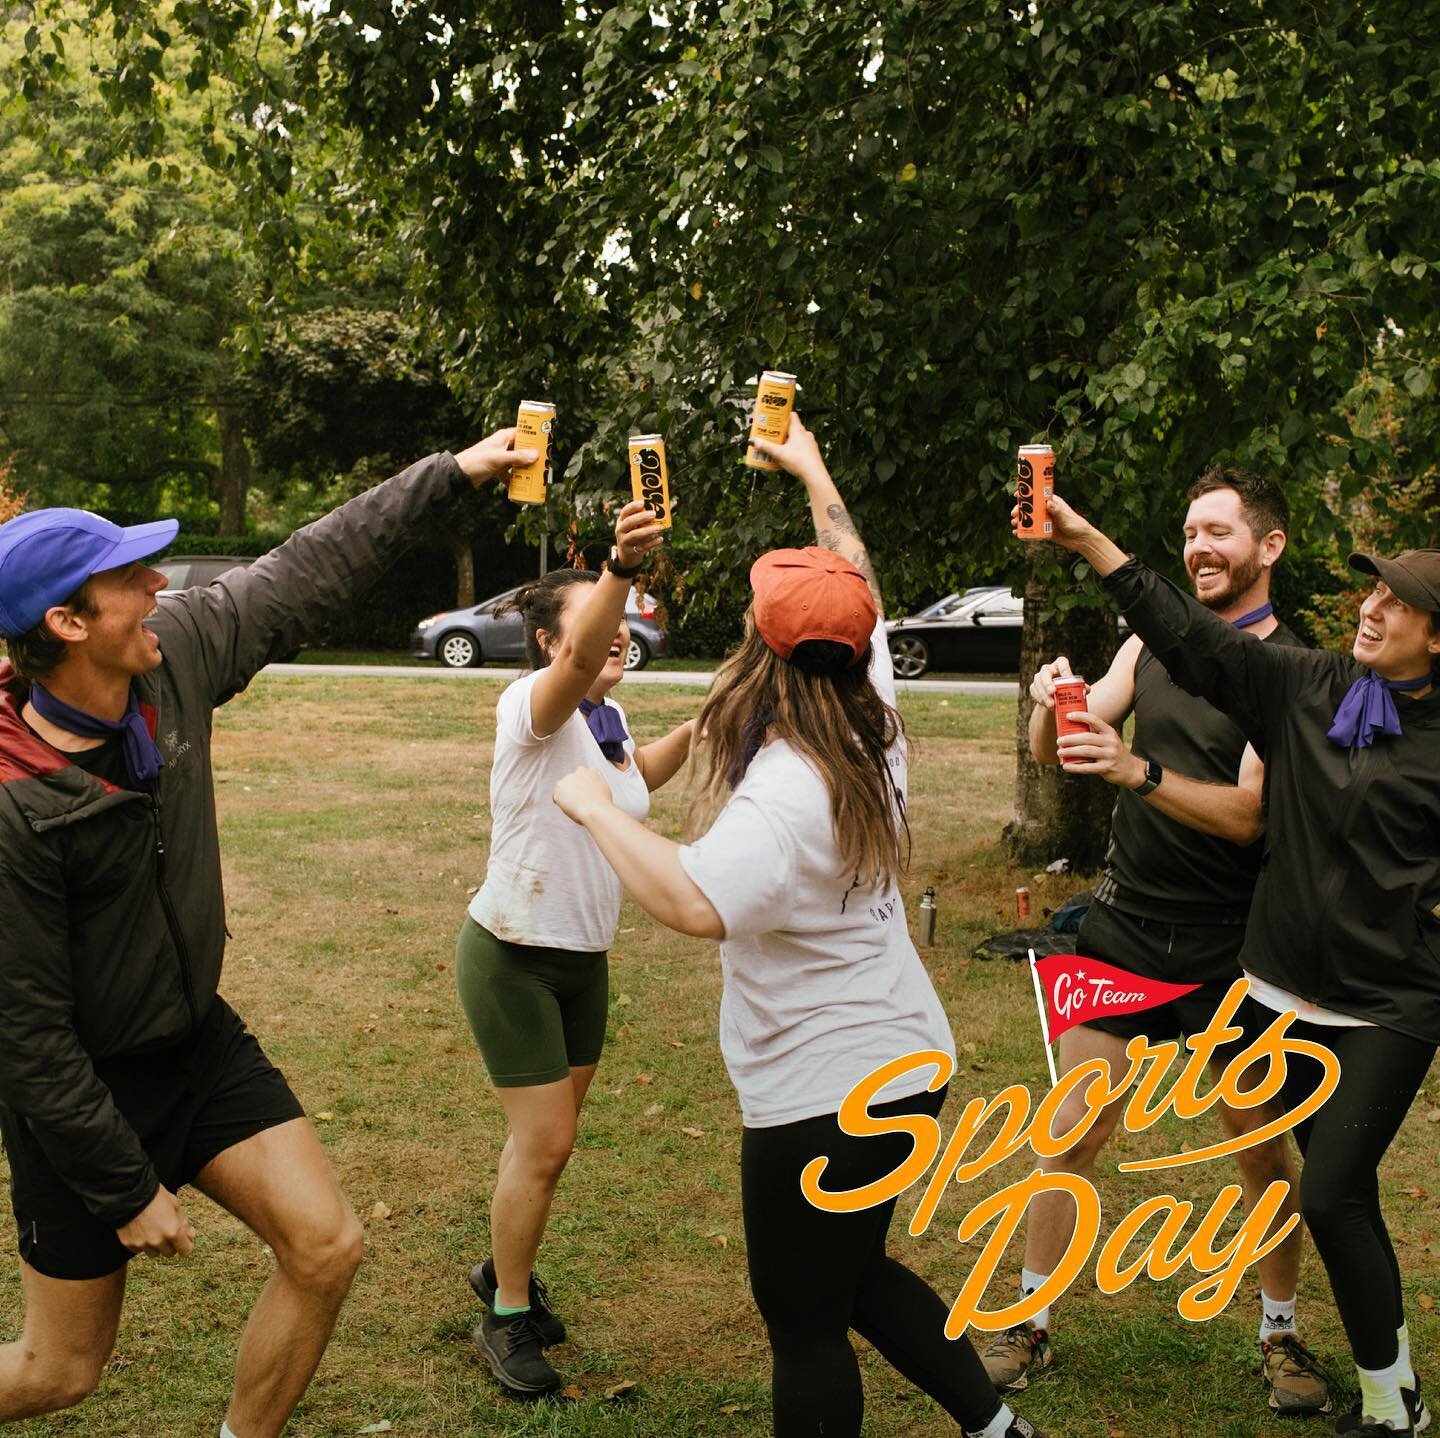 Cheers to Sports Day with your pals!

@arlokombucha will be back to help us toast our winning team!

You can expect a day full of fun games, new friends, old rivalry and some great memories.

Sign up and let us know you&rsquo;re coming. We&rsquo;d lo